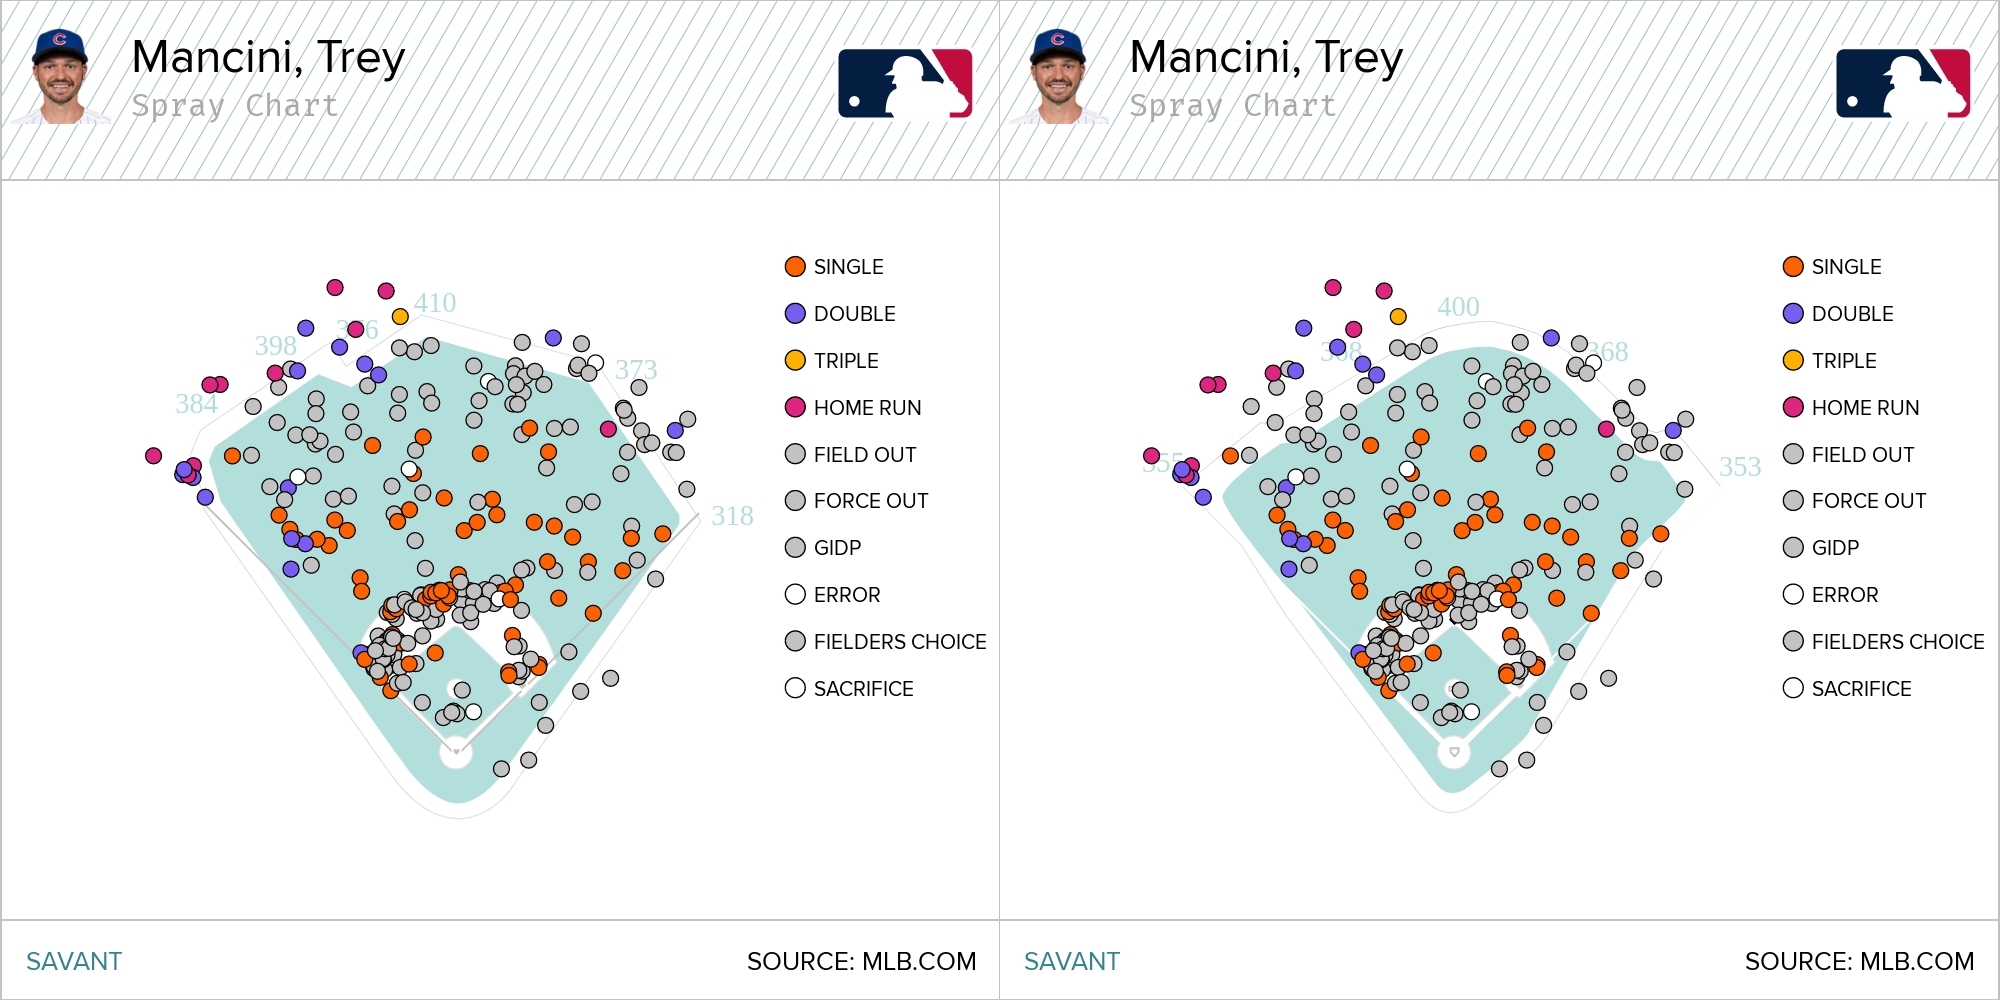 Comparing the 2022 spray charts of Trey Mancini with Camden Yards dimensions and Wrigley Field dimensions.